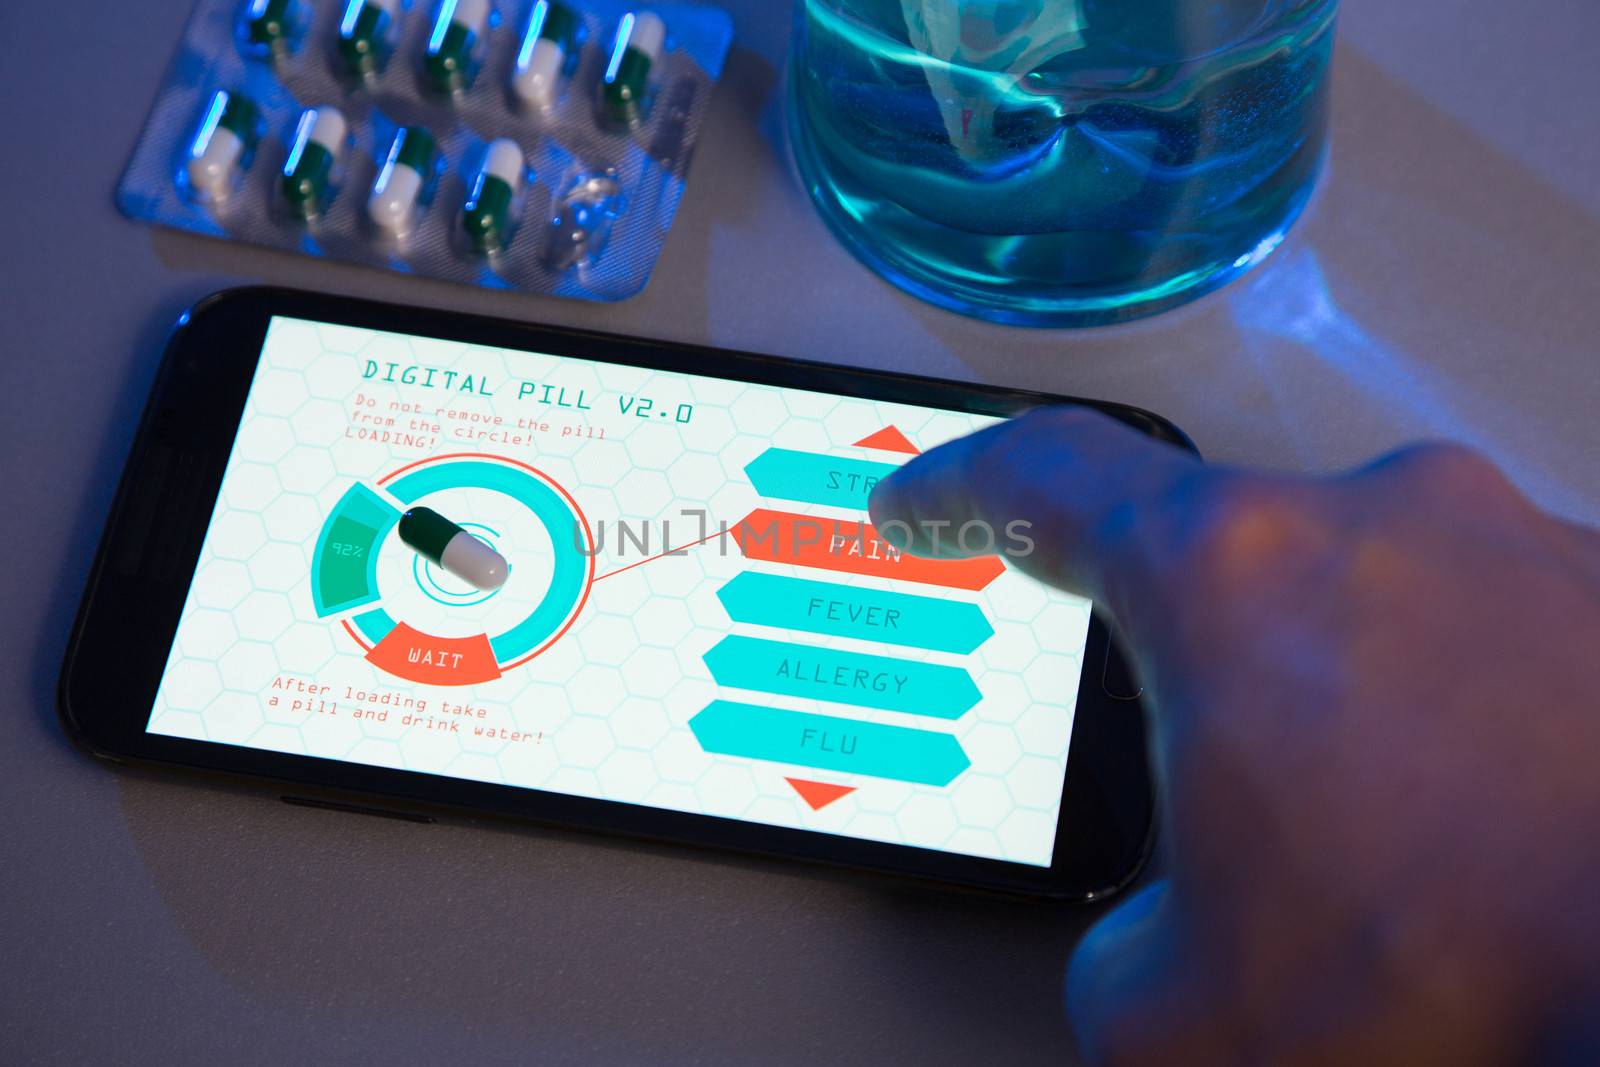 Futuristic medicine concept, choose your pill type on high-tech device, hand drawn interface 